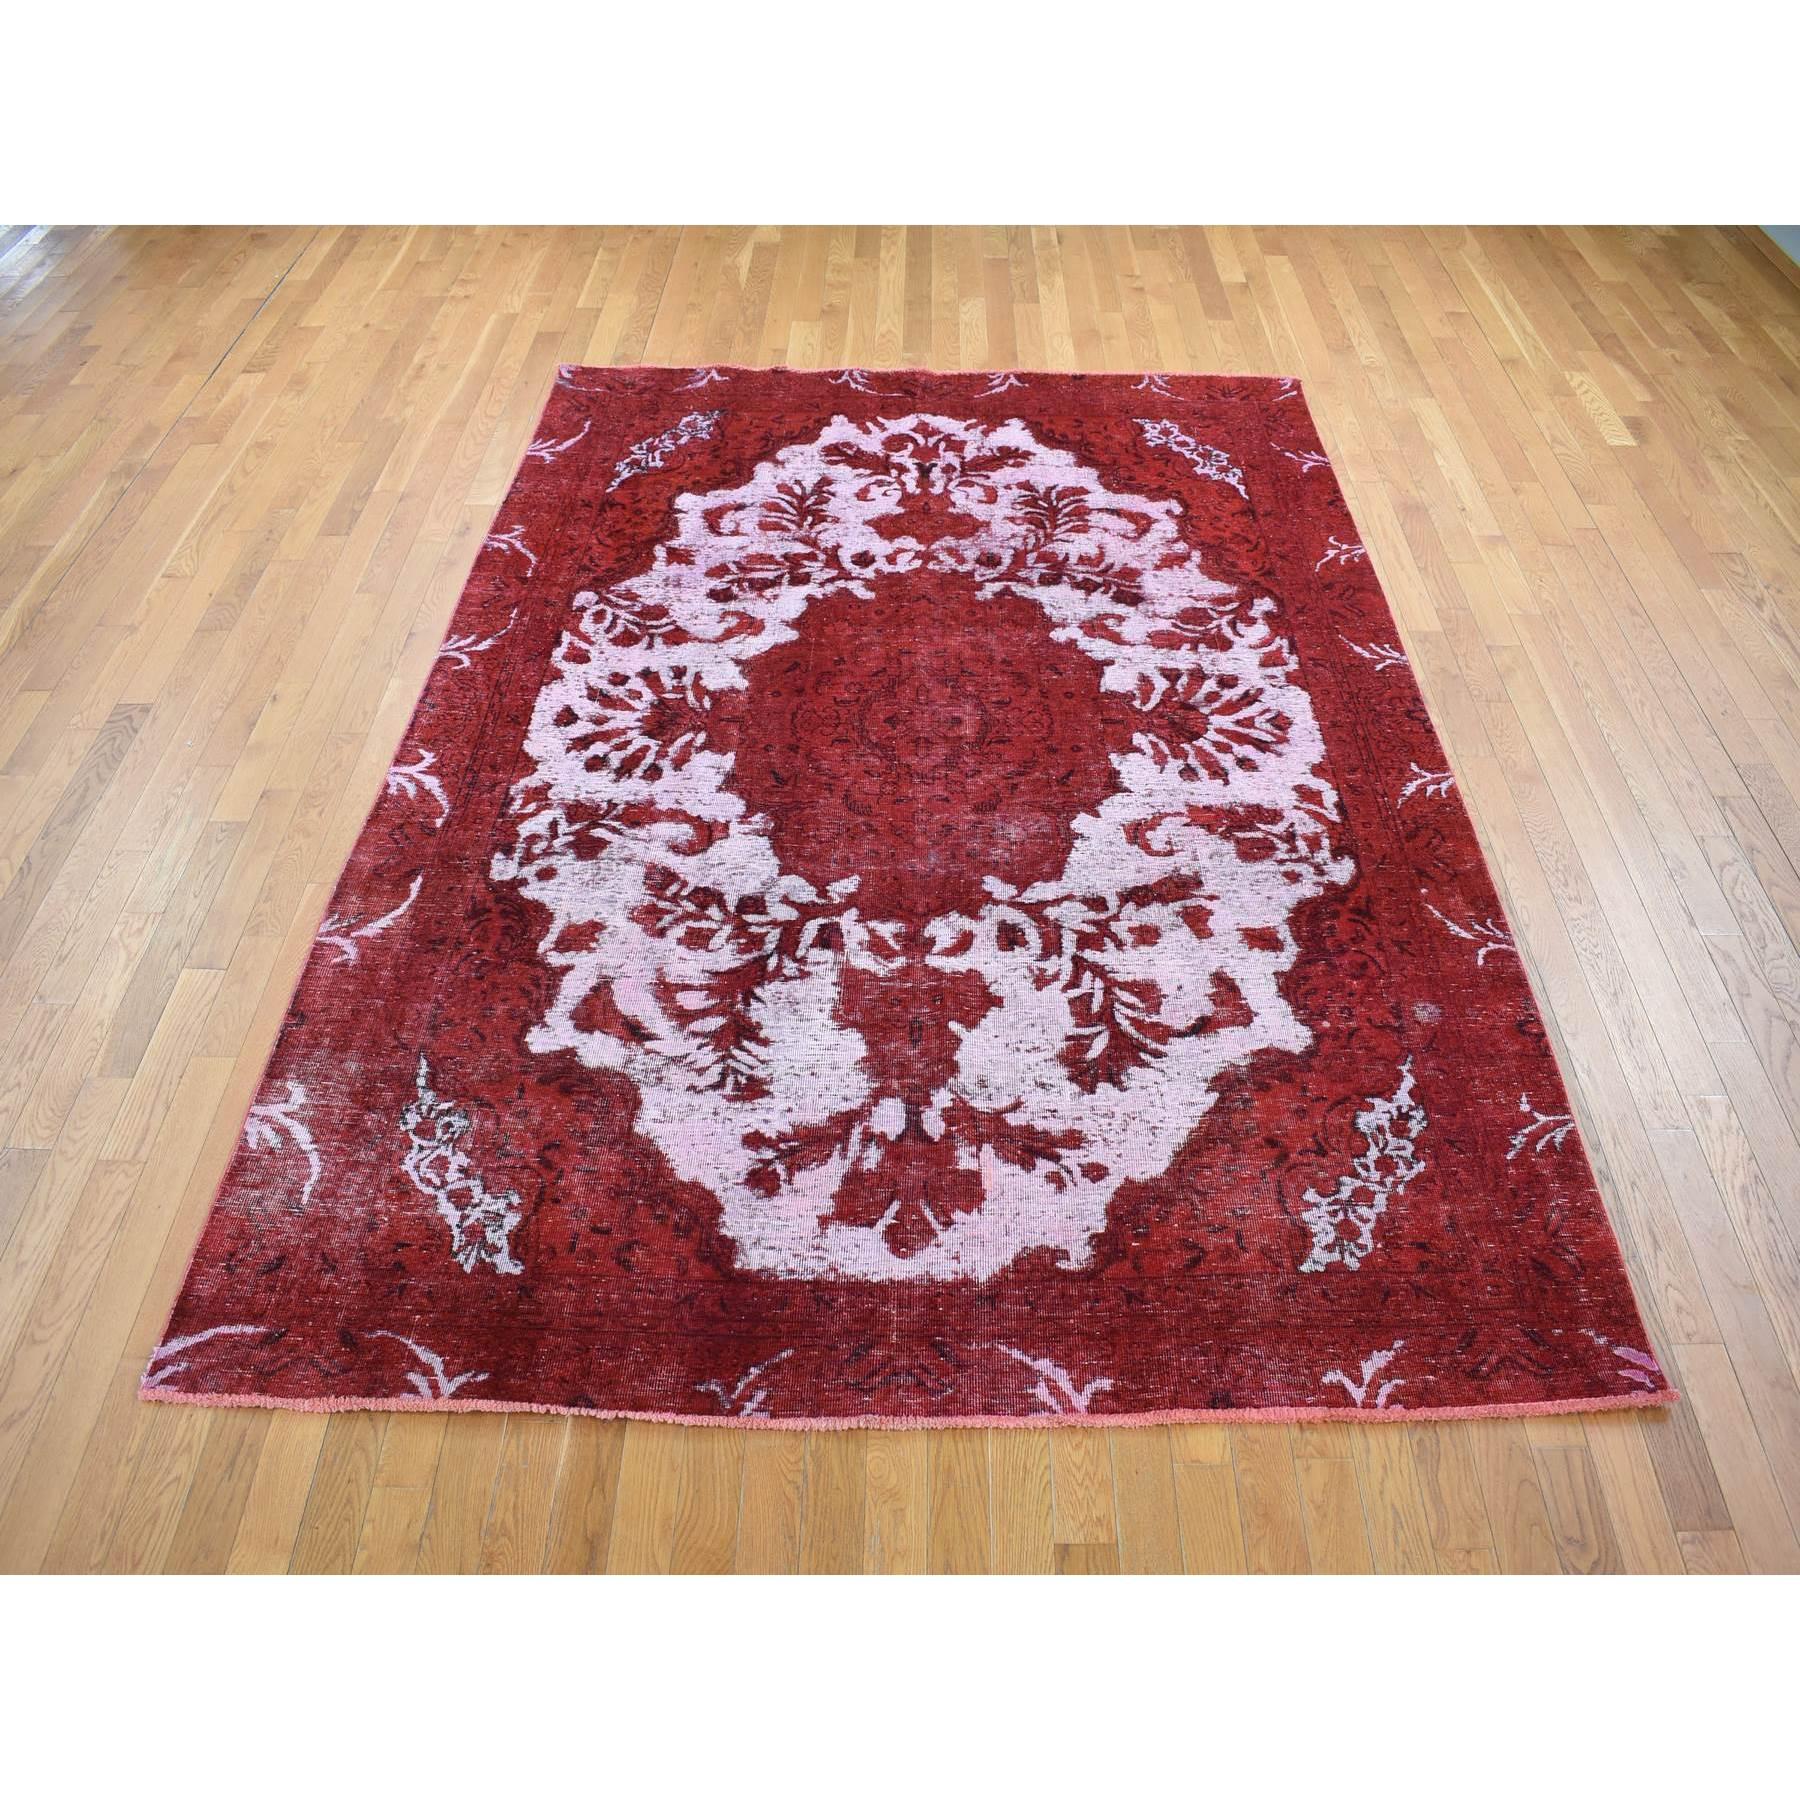 This fabulous Hand-Knotted carpet has been created and designed for extra strength and durability. This rug has been handcrafted for weeks in the traditional method that is used to make
Exact Rug Size in Feet and Inches : 7'0